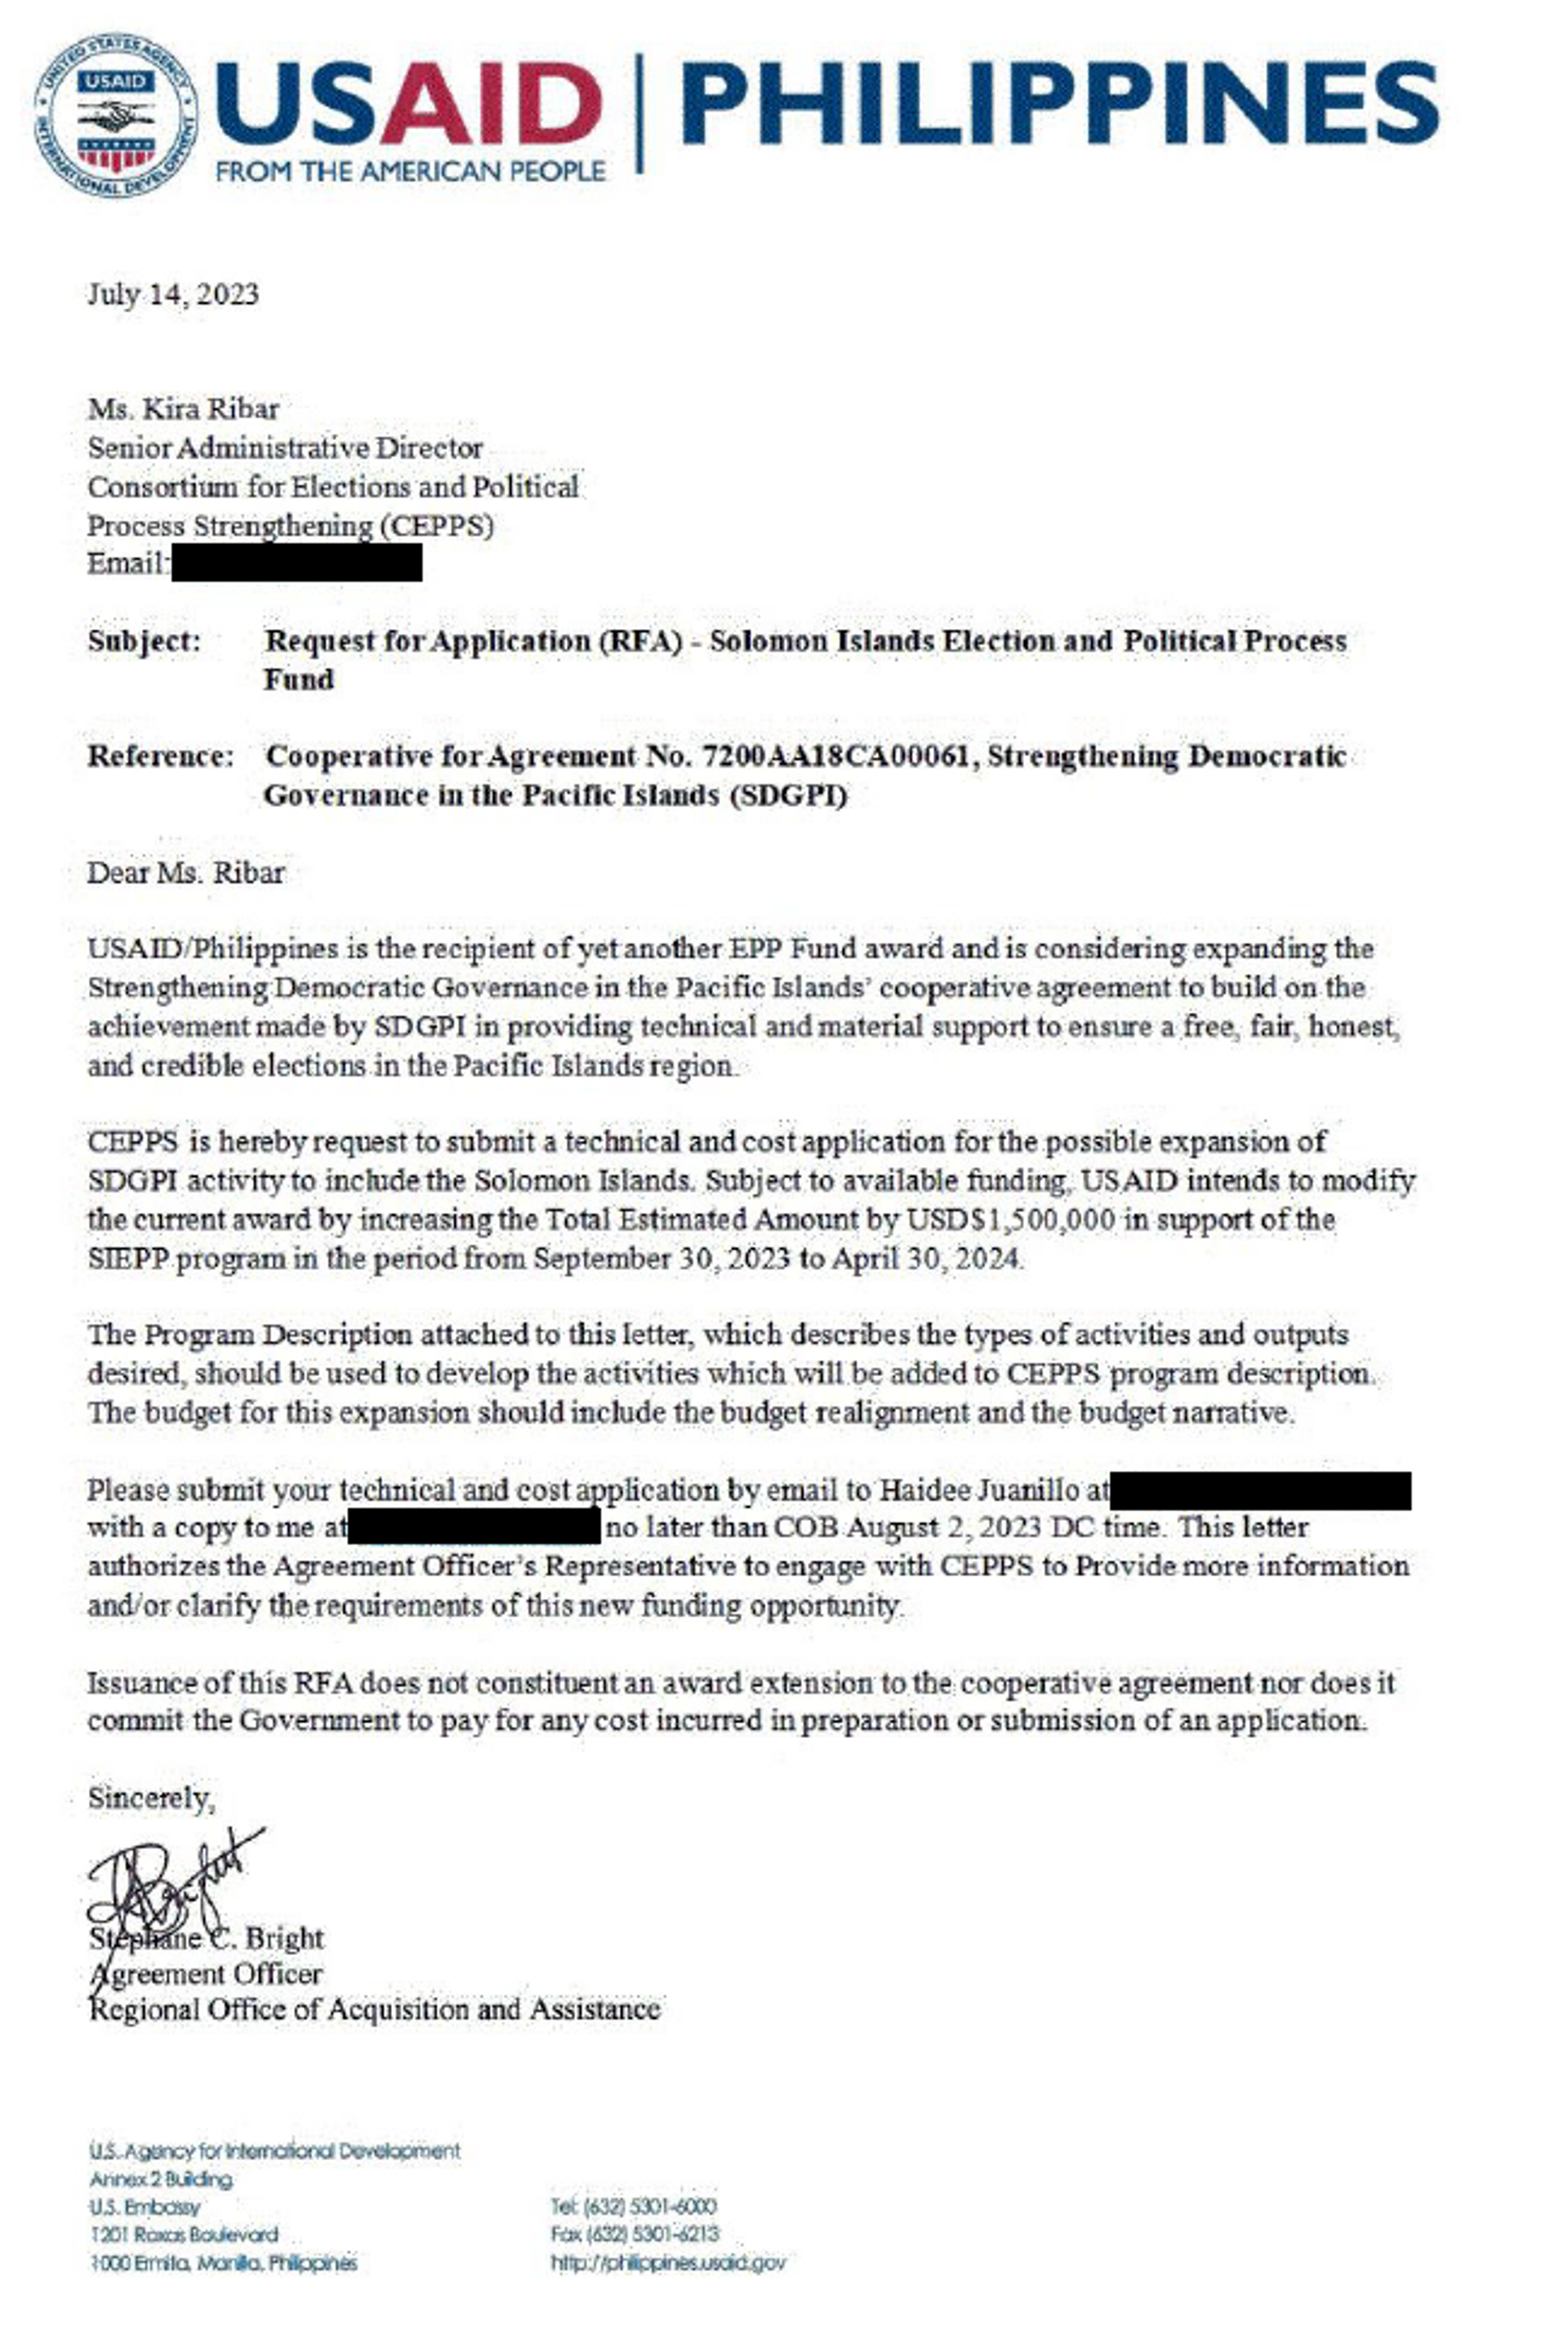 Letter from USAID Regional Office of Acquisition and Assistance agreement officer Stephane C. Bright to Kira Ribar, senior administrative director to the Consortium for Elections and Political Process Strengthening (CEPPS) regarding allocations to the Solomon Islands Election and Political Process Fund. - Sputnik International, 1920, 07.04.2024